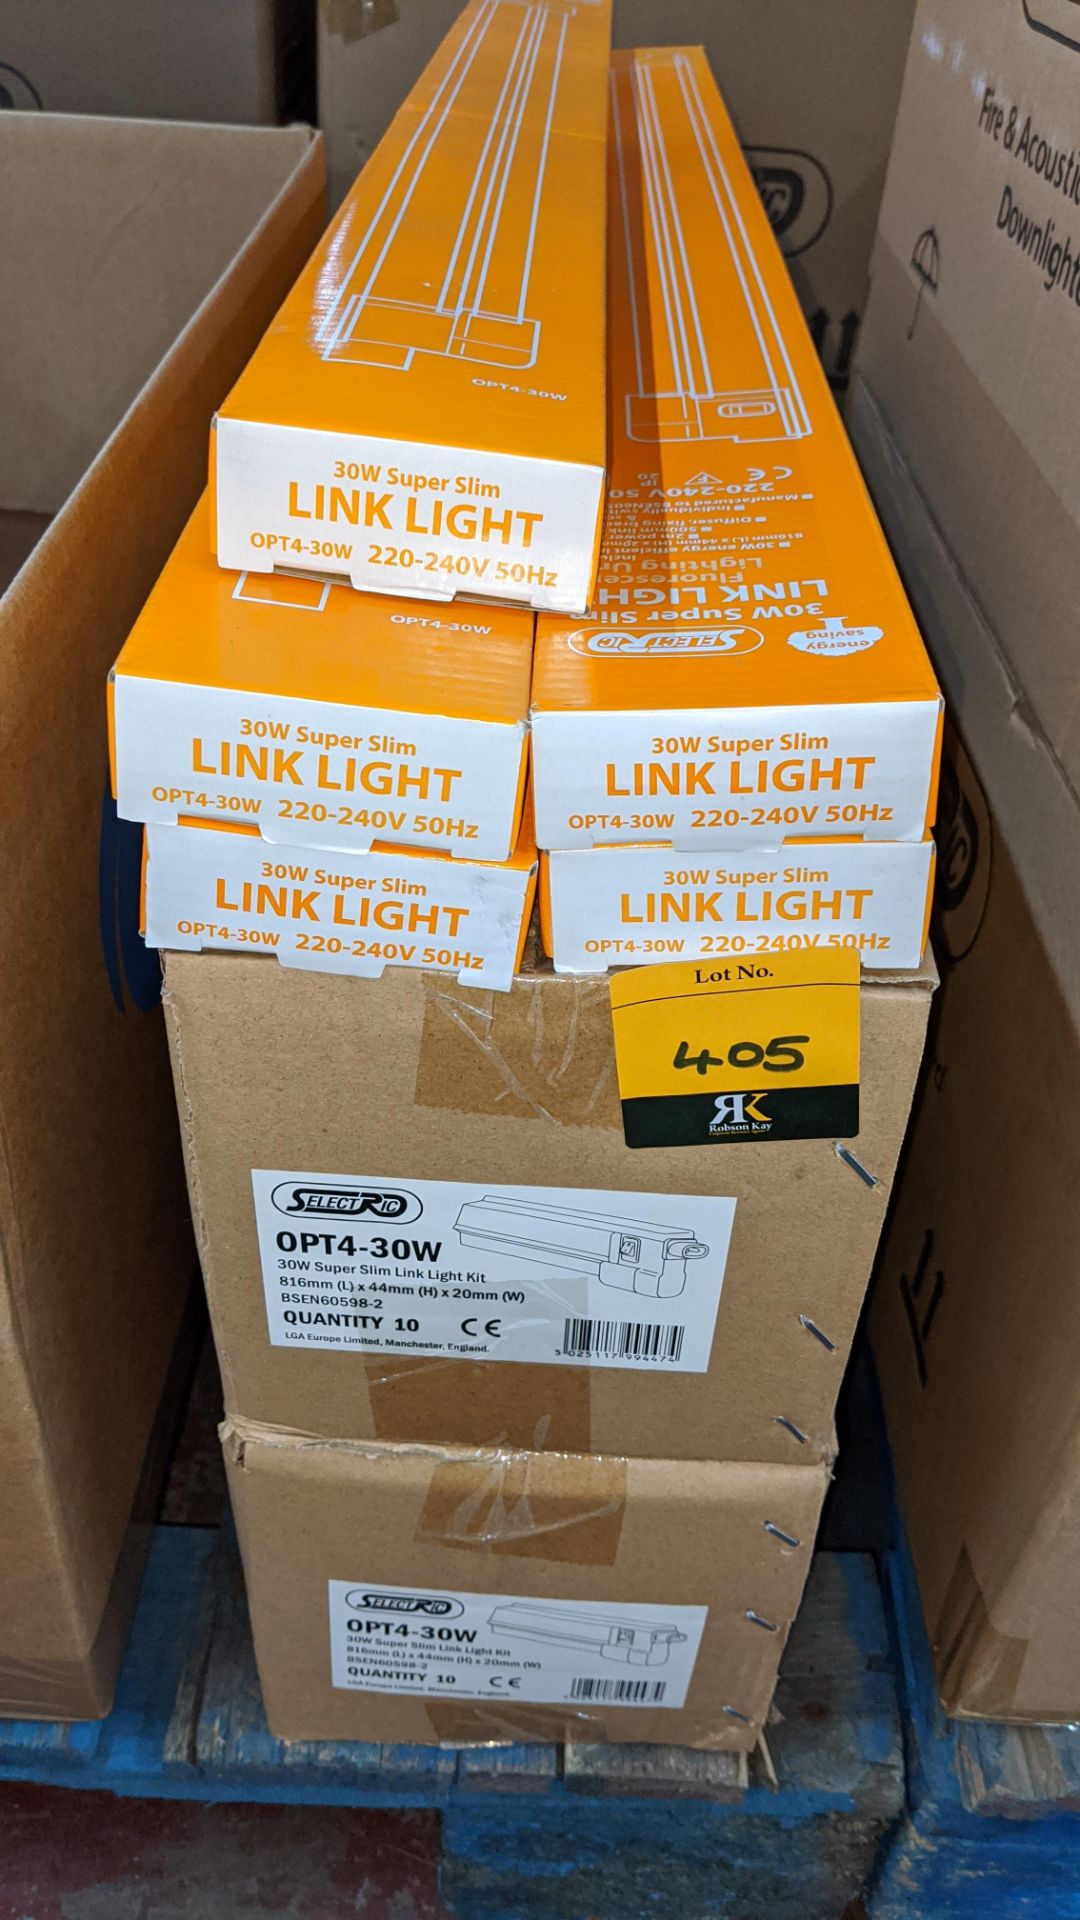 25 off Link Light 30w super slim fluorescent lighting units IMPORTANT: You must not bid unless you - Image 2 of 2